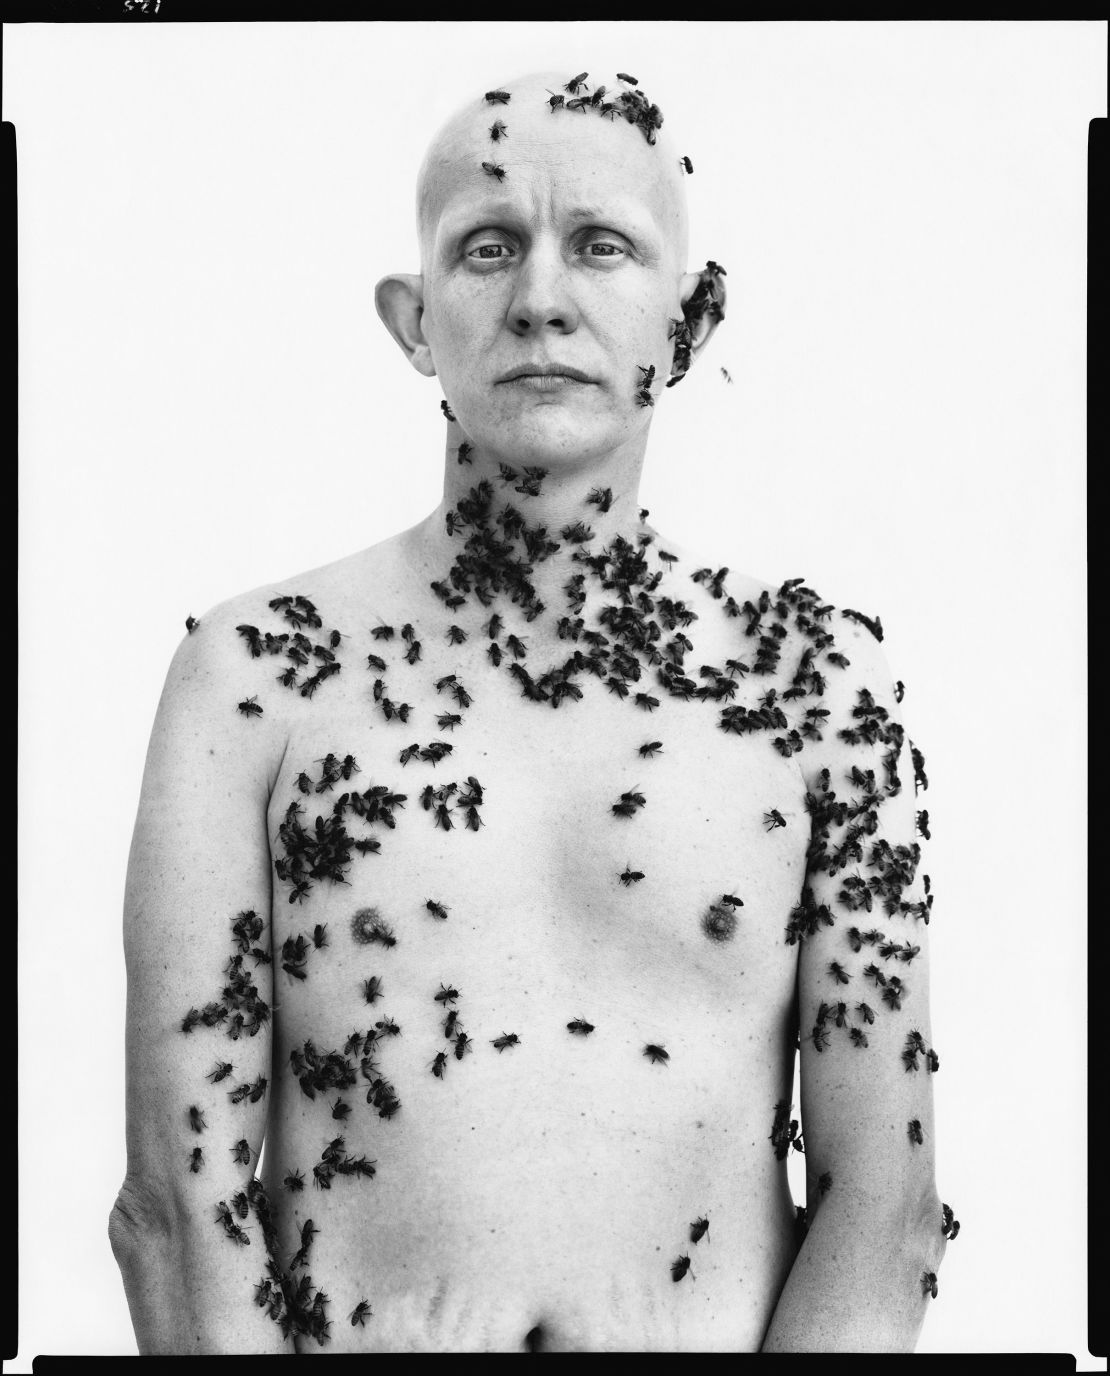 Rodarte designers Laura and Kate Mulleavy were "fascinated" by this 1981 portrait of California beekeeper Ronald Fischer, for its "depiction of humanity and nature within the constraints of formal portraiture." They said: "The bees bring with them a looming possibility of danger, and Avedon controls that fear by capturing the brief yet calculated moment within the carefully constructed portrait."